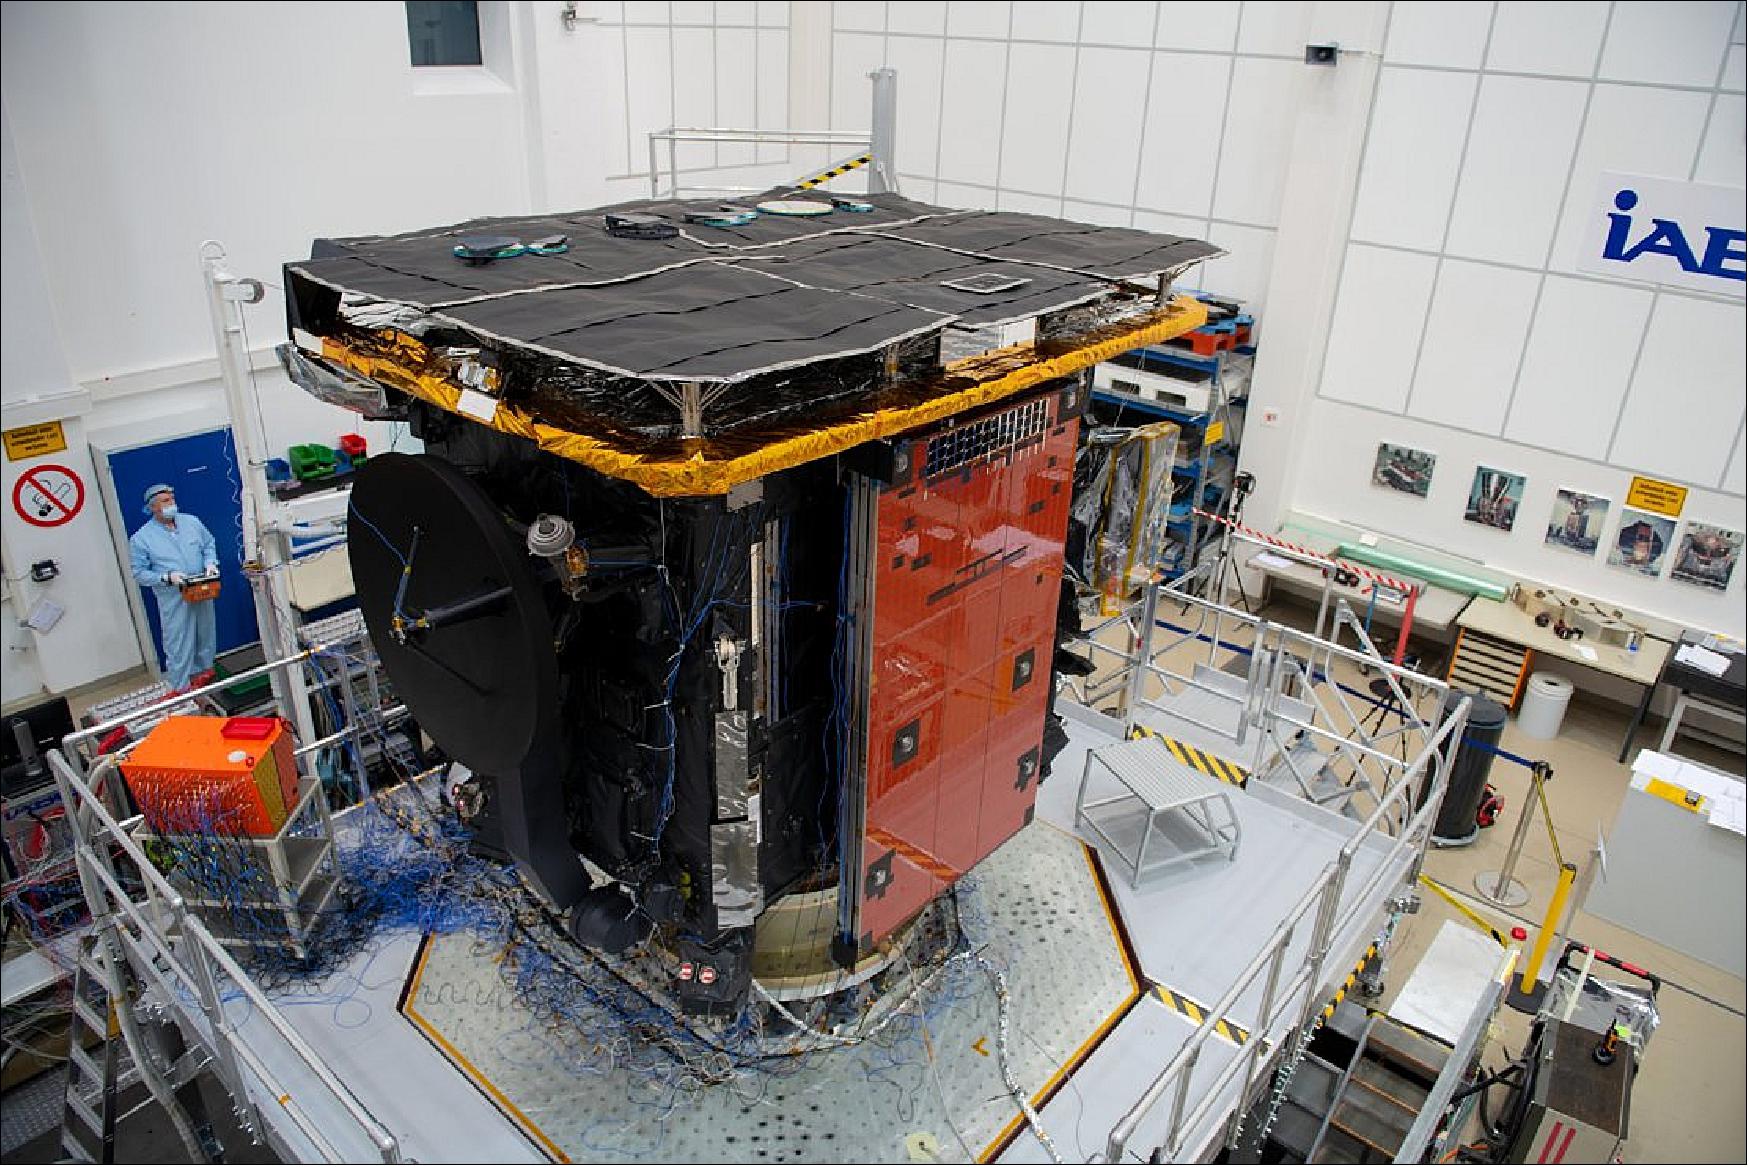 Figure 12: In this image, ESA's new Solar Orbiter spacecraft is seen during preparations for a vibration test campaign at the IABG facility in Ottobrunn, Germany, in March 2019 (image credit: ESA, S. Corvaja)